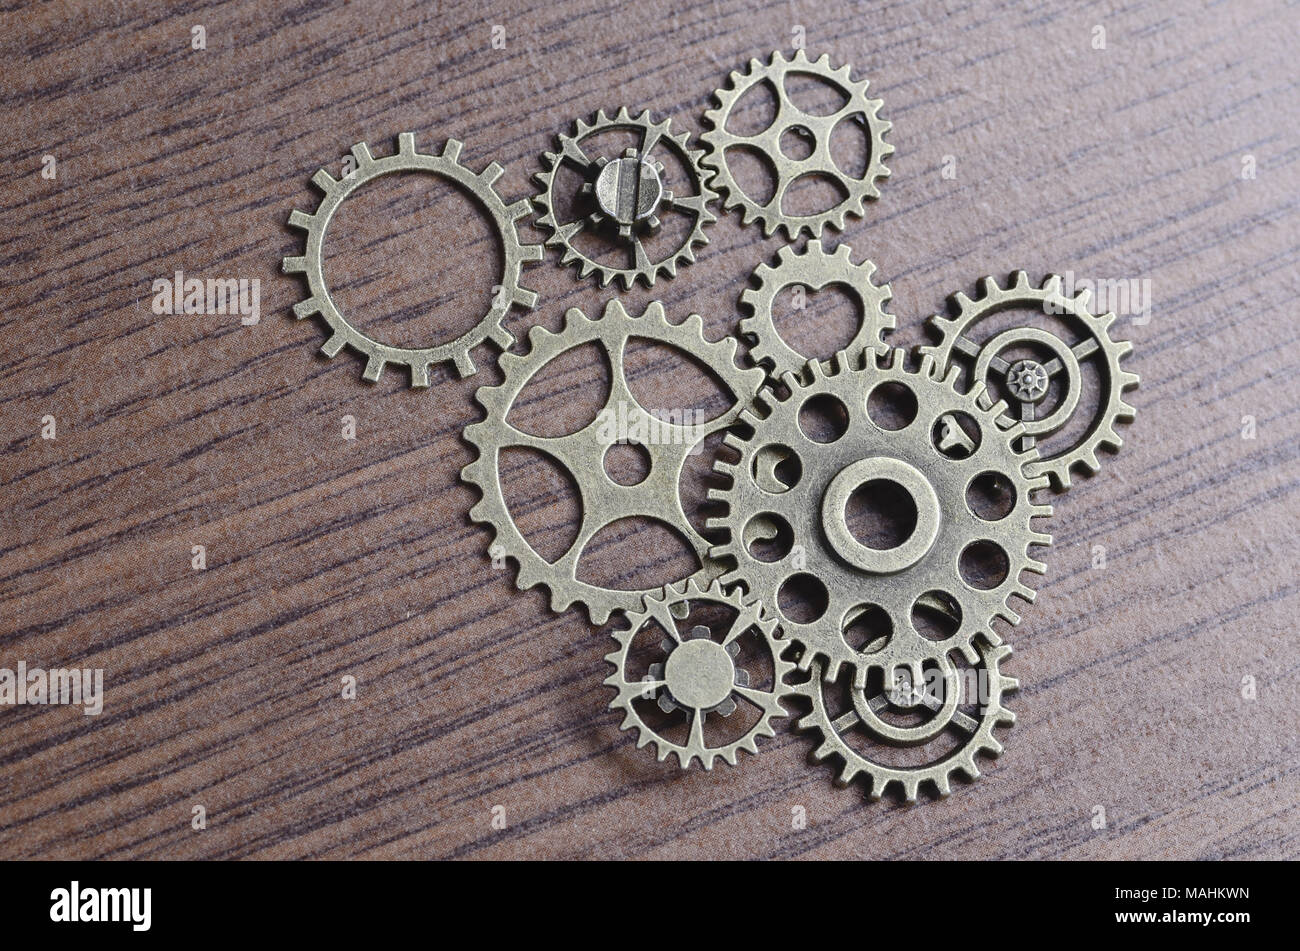 Cogs, Wheels and Gears against a wooden background. Stock Photo